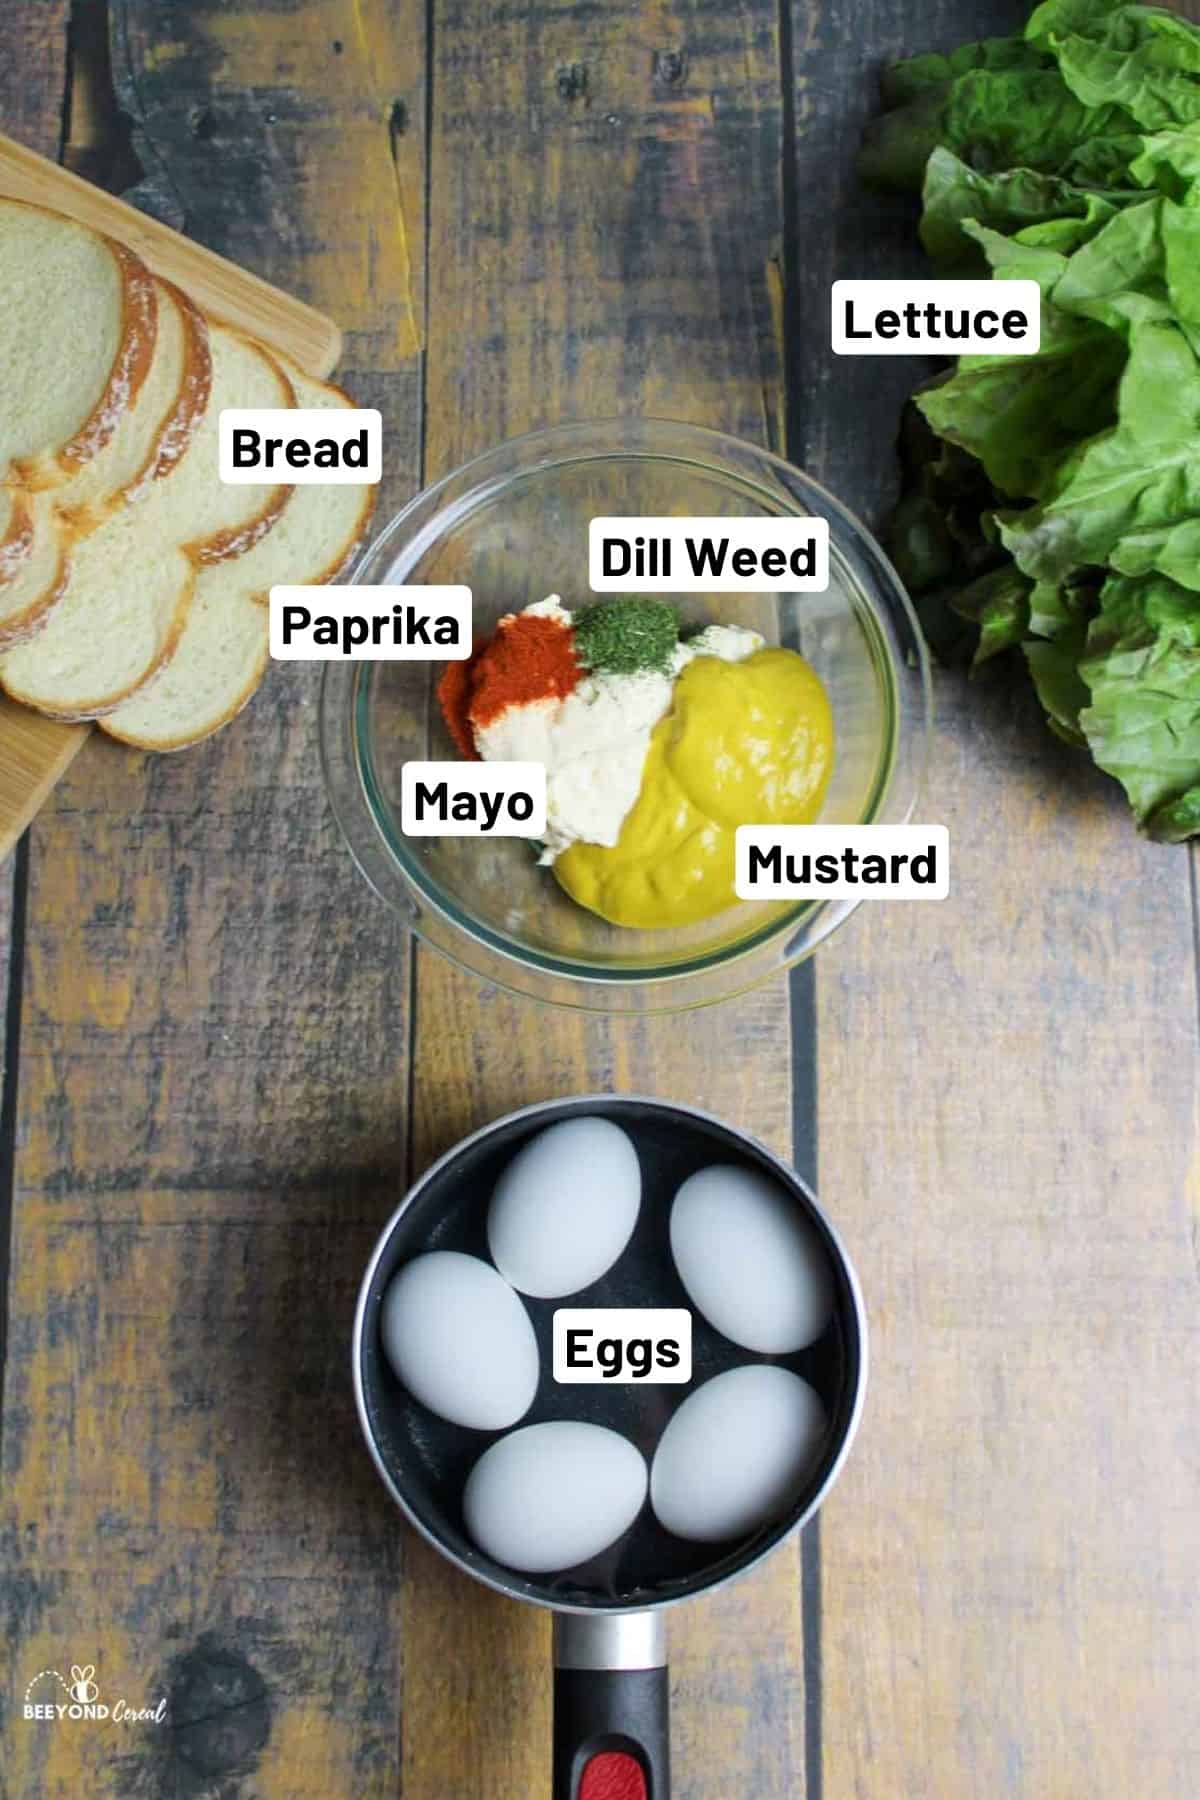 ingredients needed to make egg salad sandwiches